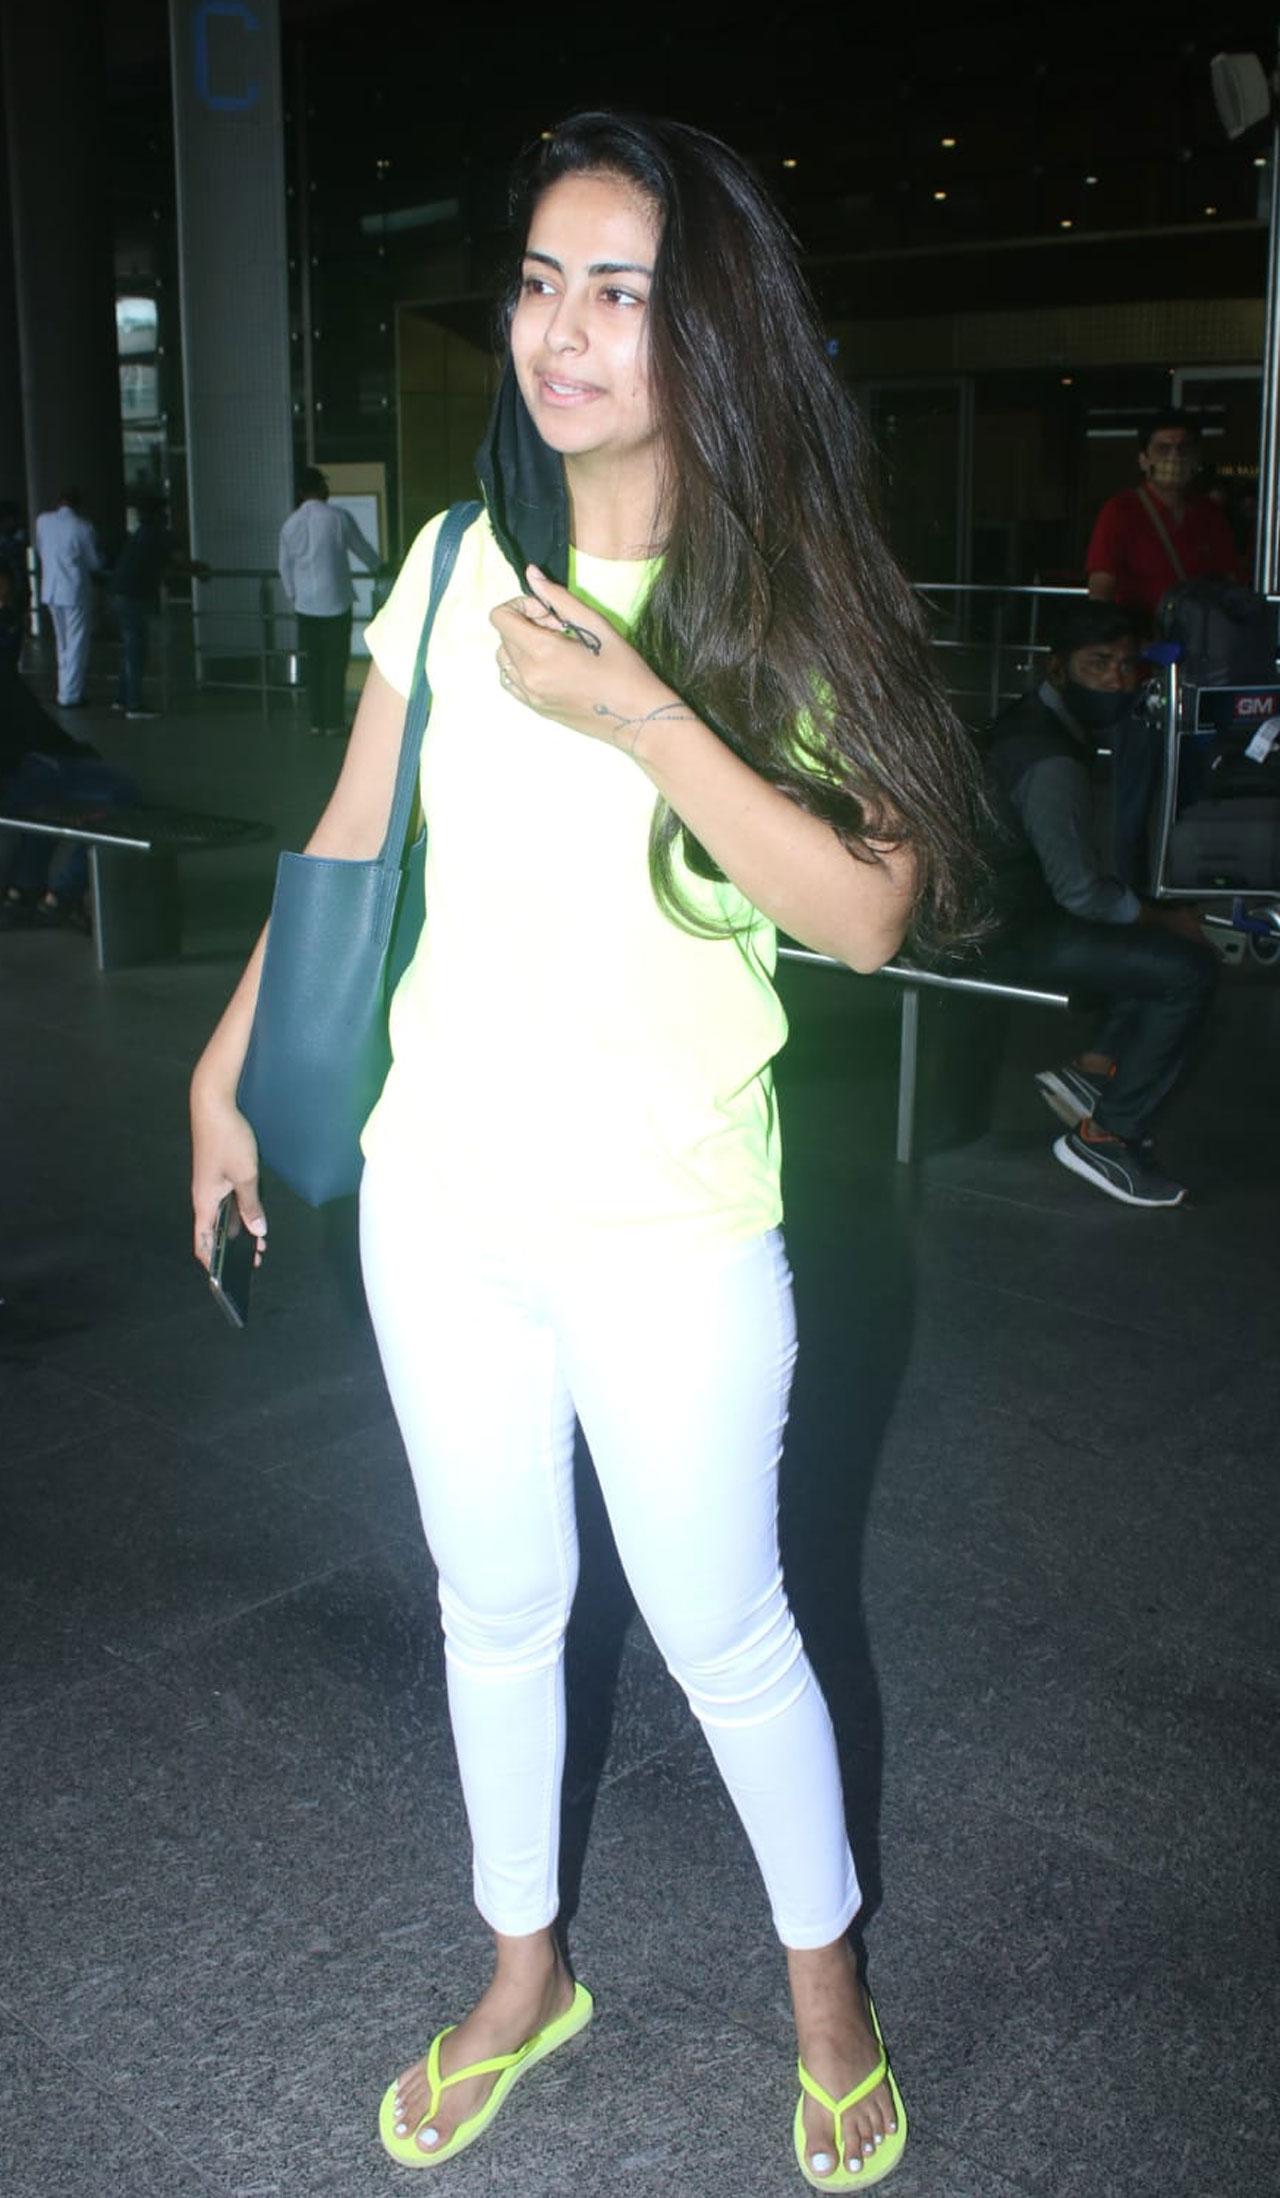 'Balika Vadhu' fame Avika Gor was also spotted in the city, at the airport. Gor rose to fame playing Anandi in the TV show 'Balika Vadhu' alongside Surekha Sikri, who essayed the popular Dadisa. Avika says she is lucky to have started her journey with Sikri around in the series. Sikri passed away on Friday following a cardiac arrest. She was 75. 